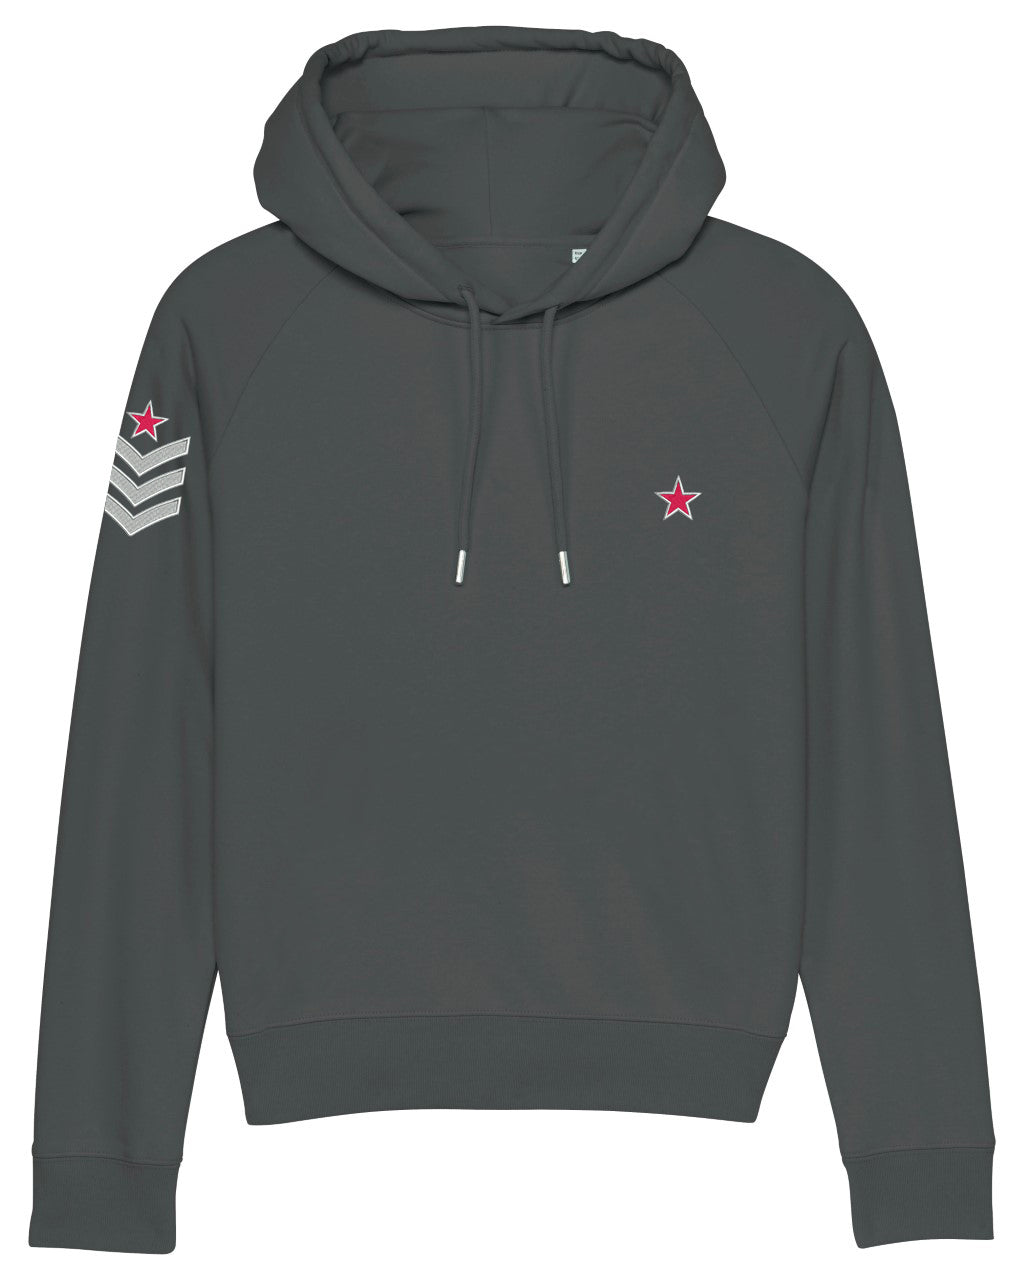 Anthracite Grey Military Style Hoodie - MADE TO ORDER